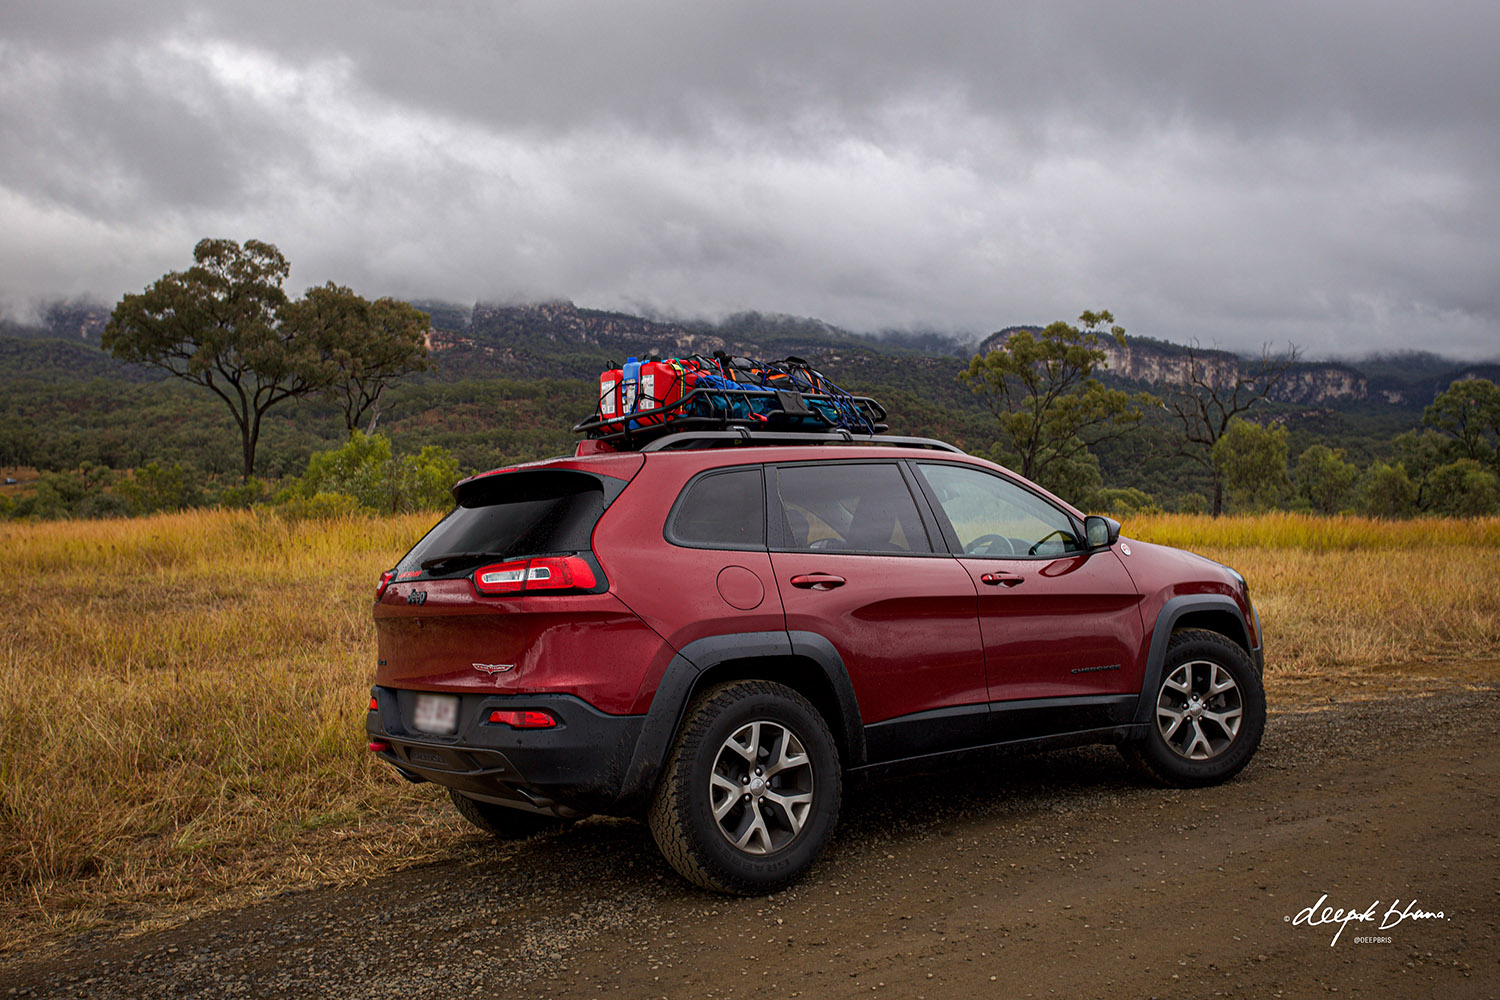 Carnarvon Gorge - Jeep with roof rack on dirt road with cliffs in the background